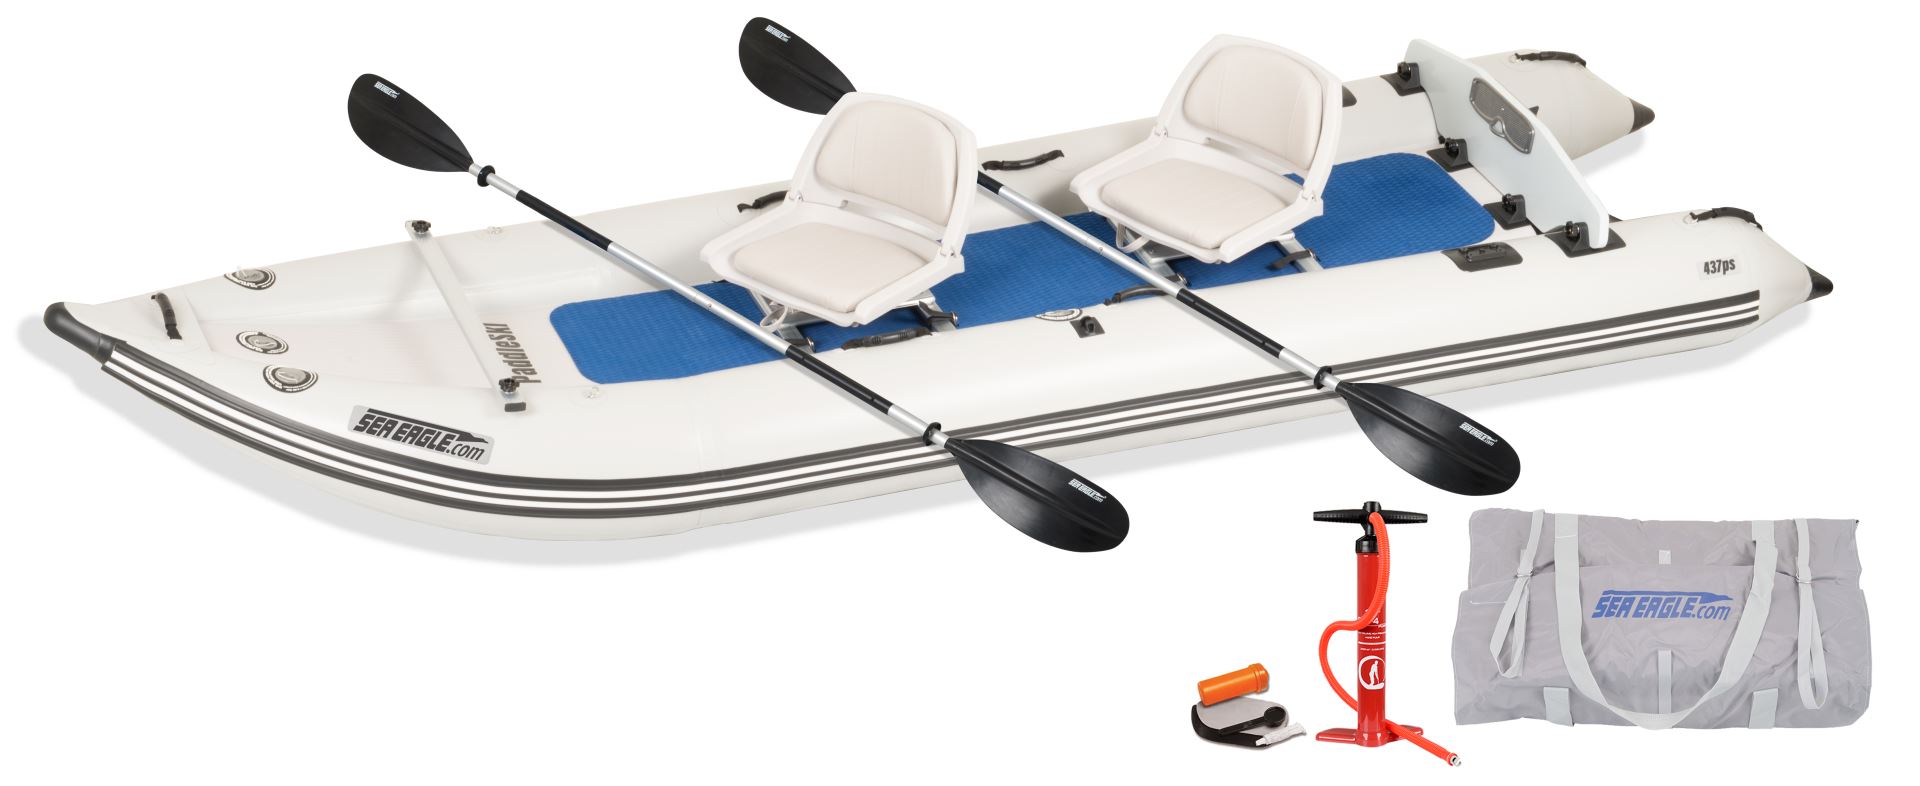 Sea Eagle 375fc Foldcat  2 Person Infltable Fishing Boat